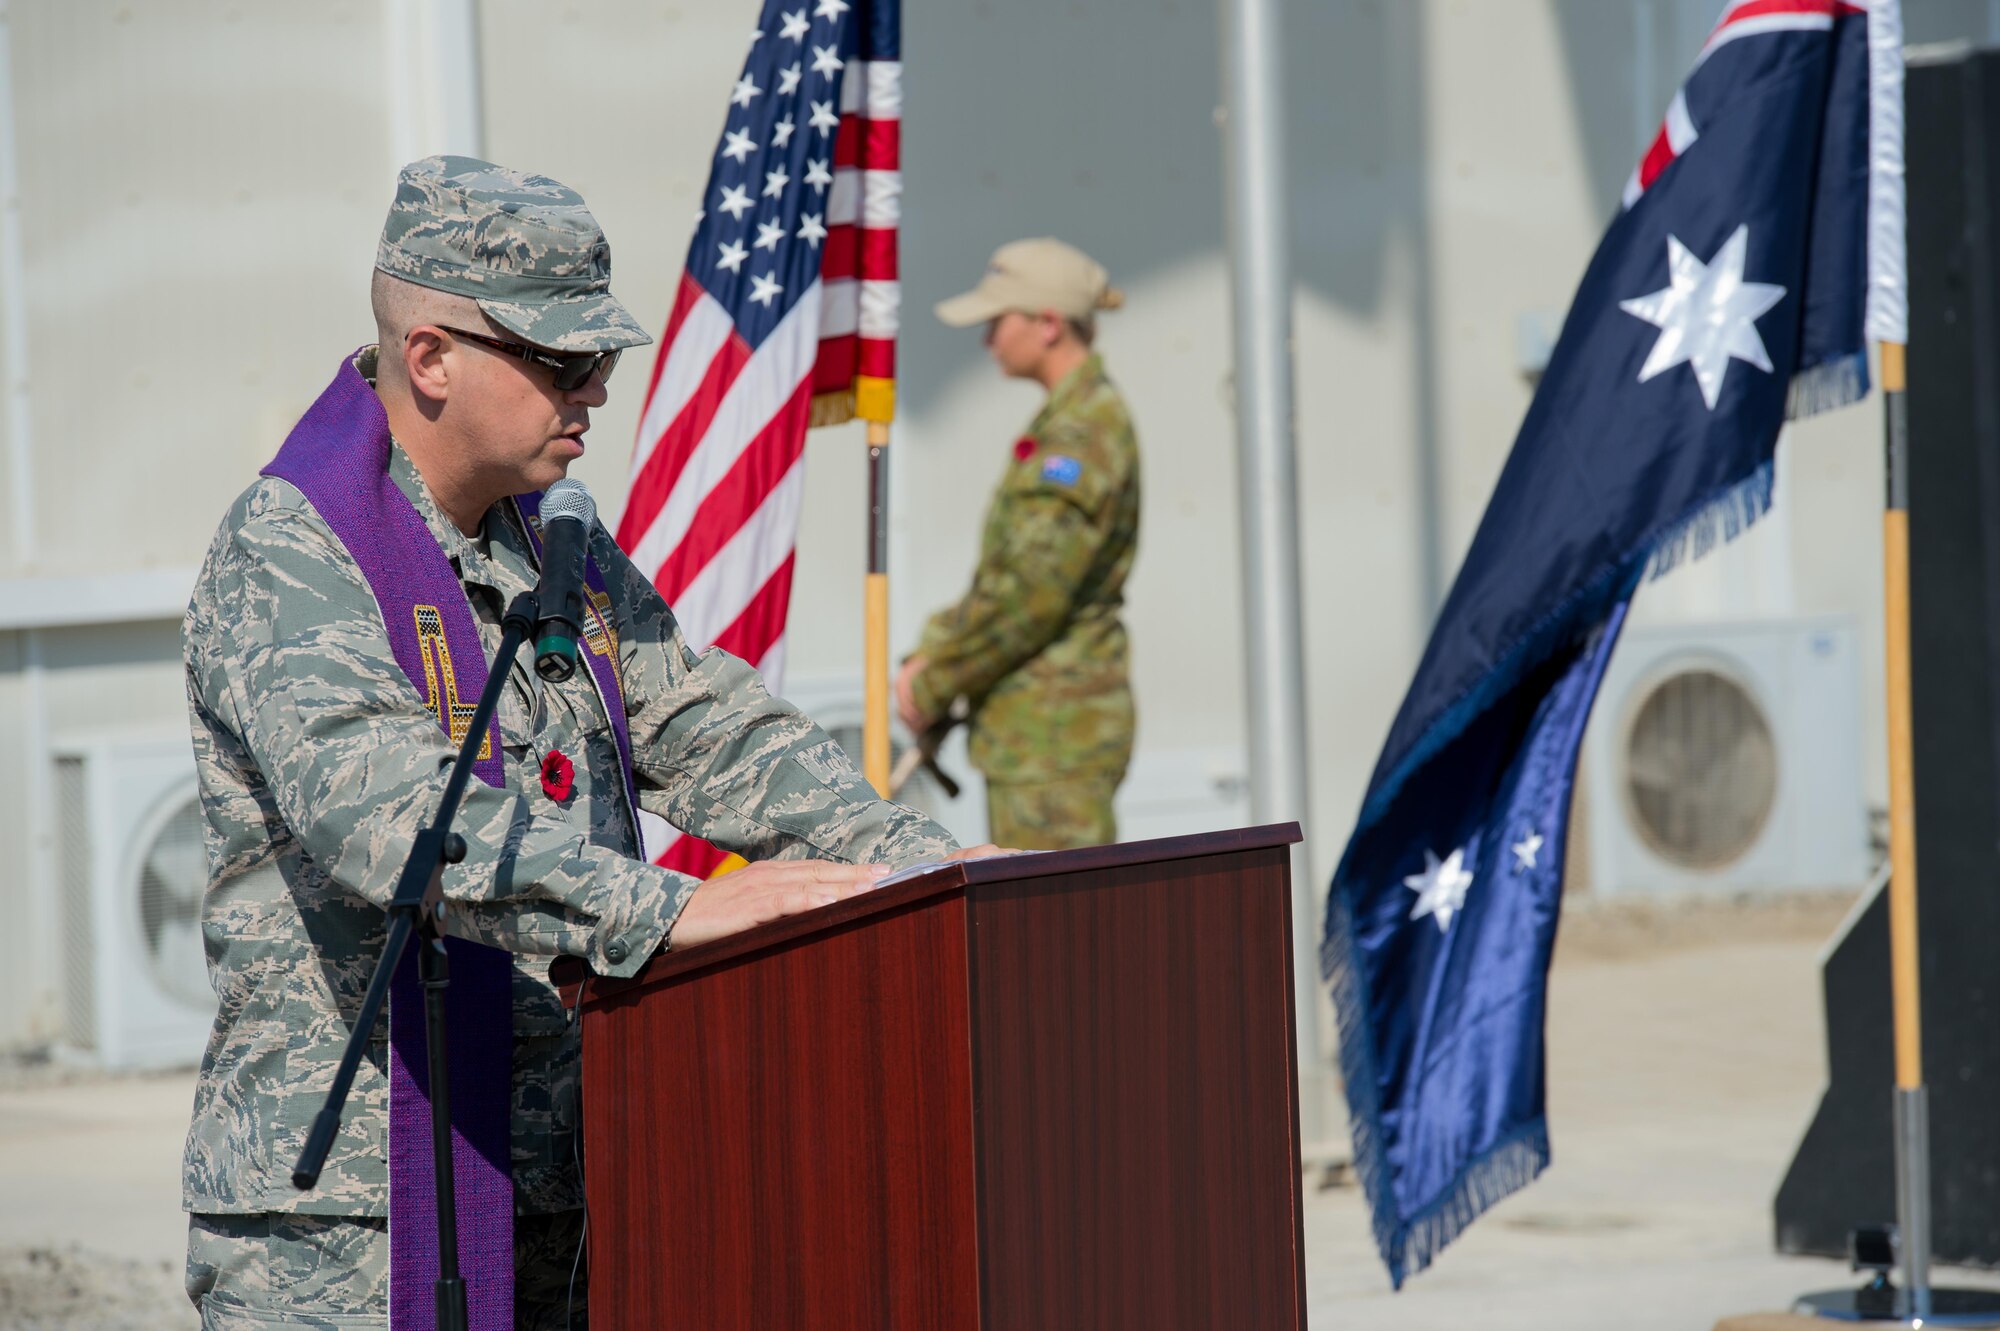 Lt Col. Michael, 380 Air Expeditionary Wing Chaplain, delivers a reading during a Coalition Veteran’s Day ceremony on Nov. 11, 2016 at an undisclosed location in Southwest Asia. “Conducting this Remembrance and Veterans' Day Service together, underscores that this high calling to authentic military service transcends any one culture or nationality, and that all those who have served such a noble purpose will be, and are, rightly honored and revered by all people of good will,” said Michael.  (U.S. Air Force photo by Senior Airman Tyler Woodward)